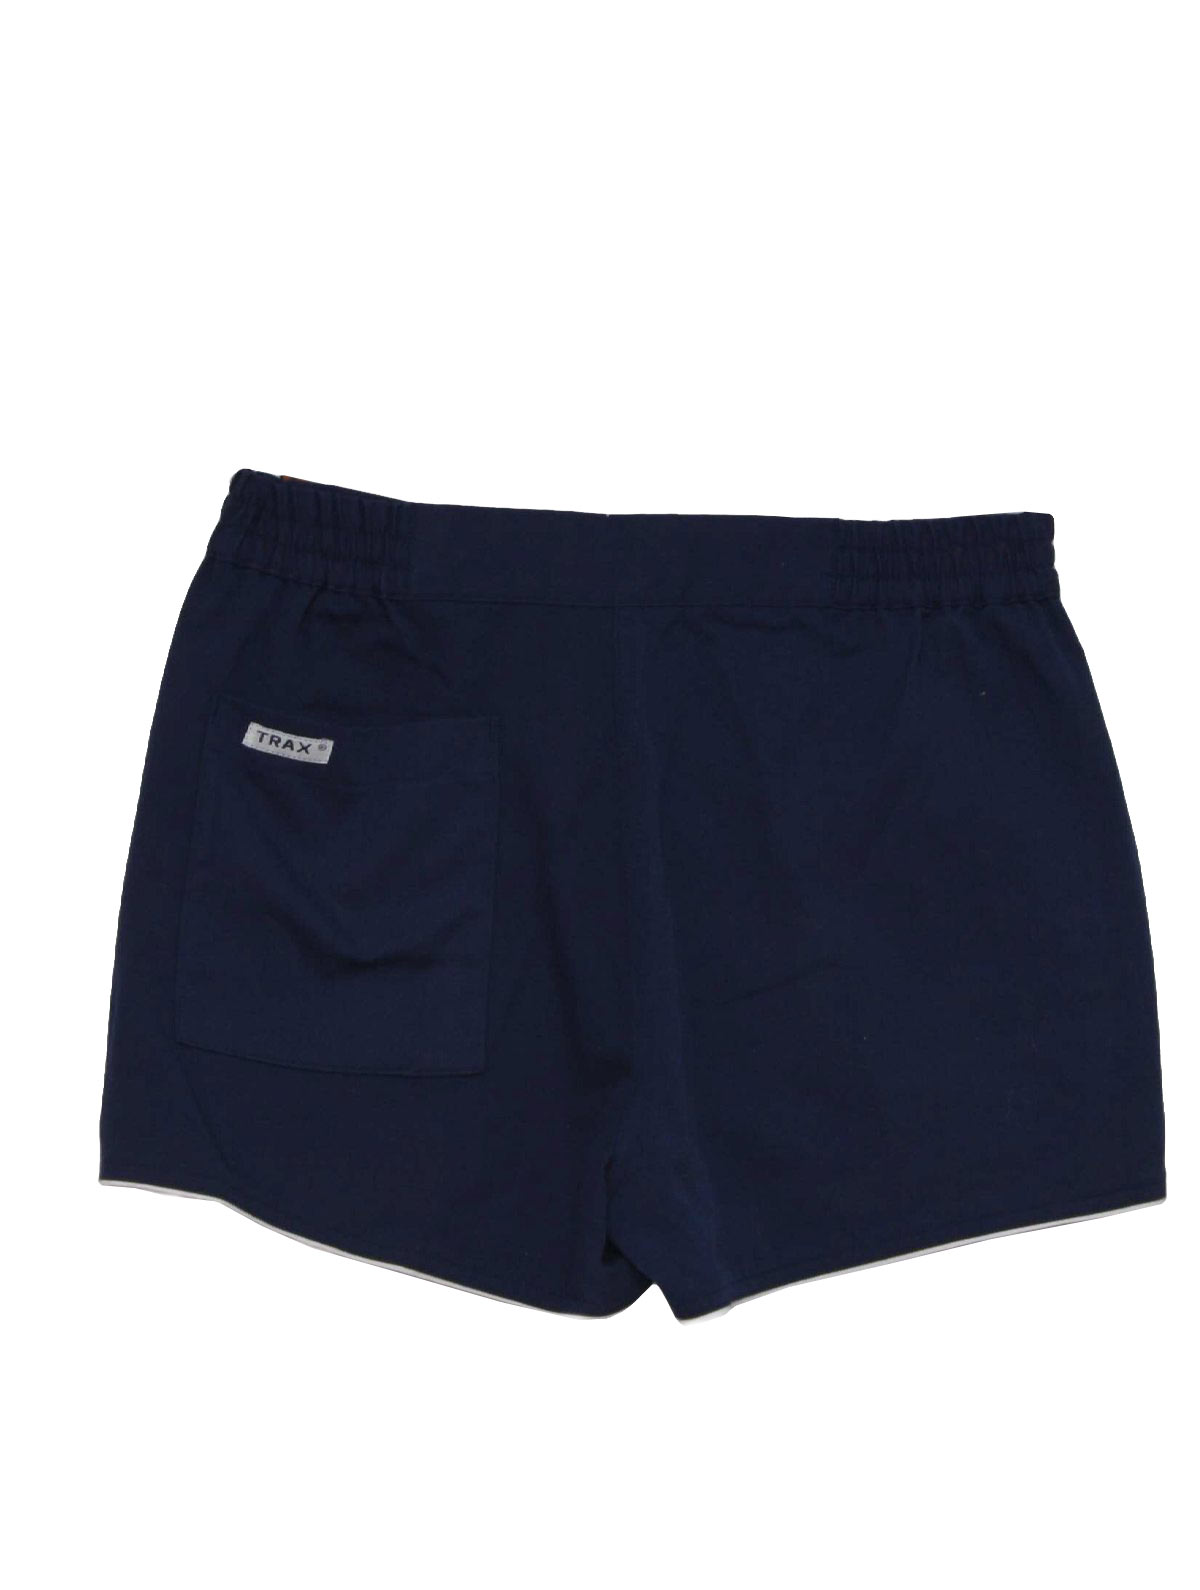 Trax 80's Vintage Shorts: Early 80s -Trax- Mens dark blue polyester and ...